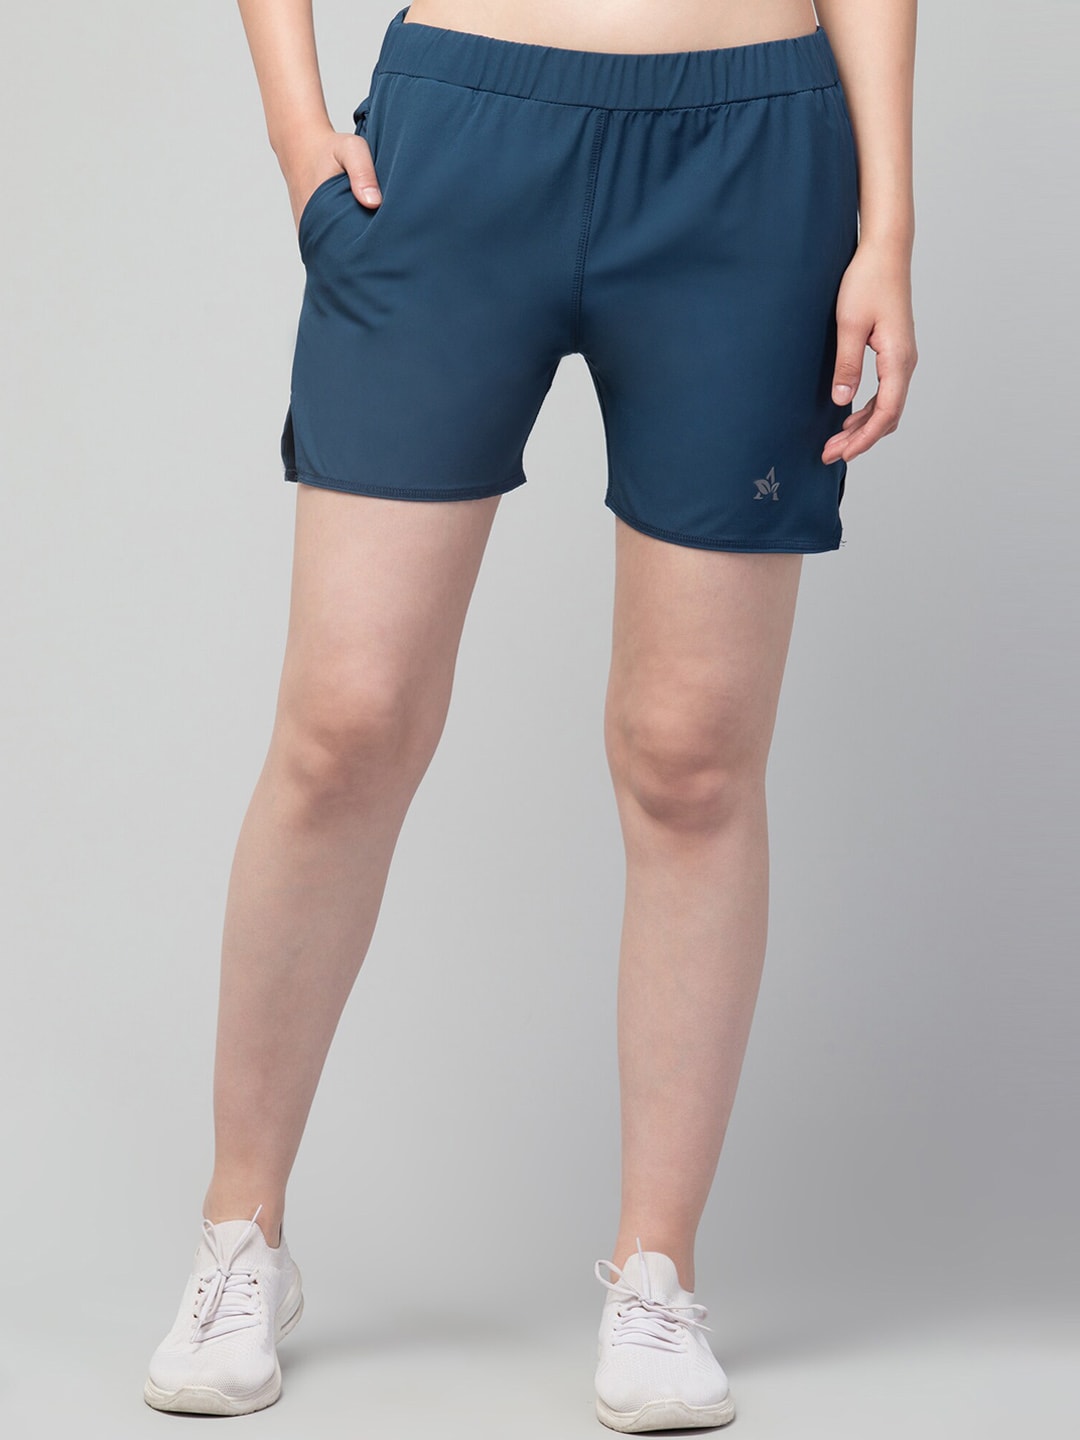 Lebami Women Mid-Rise e-Dry Technology Sports Shorts Price in India